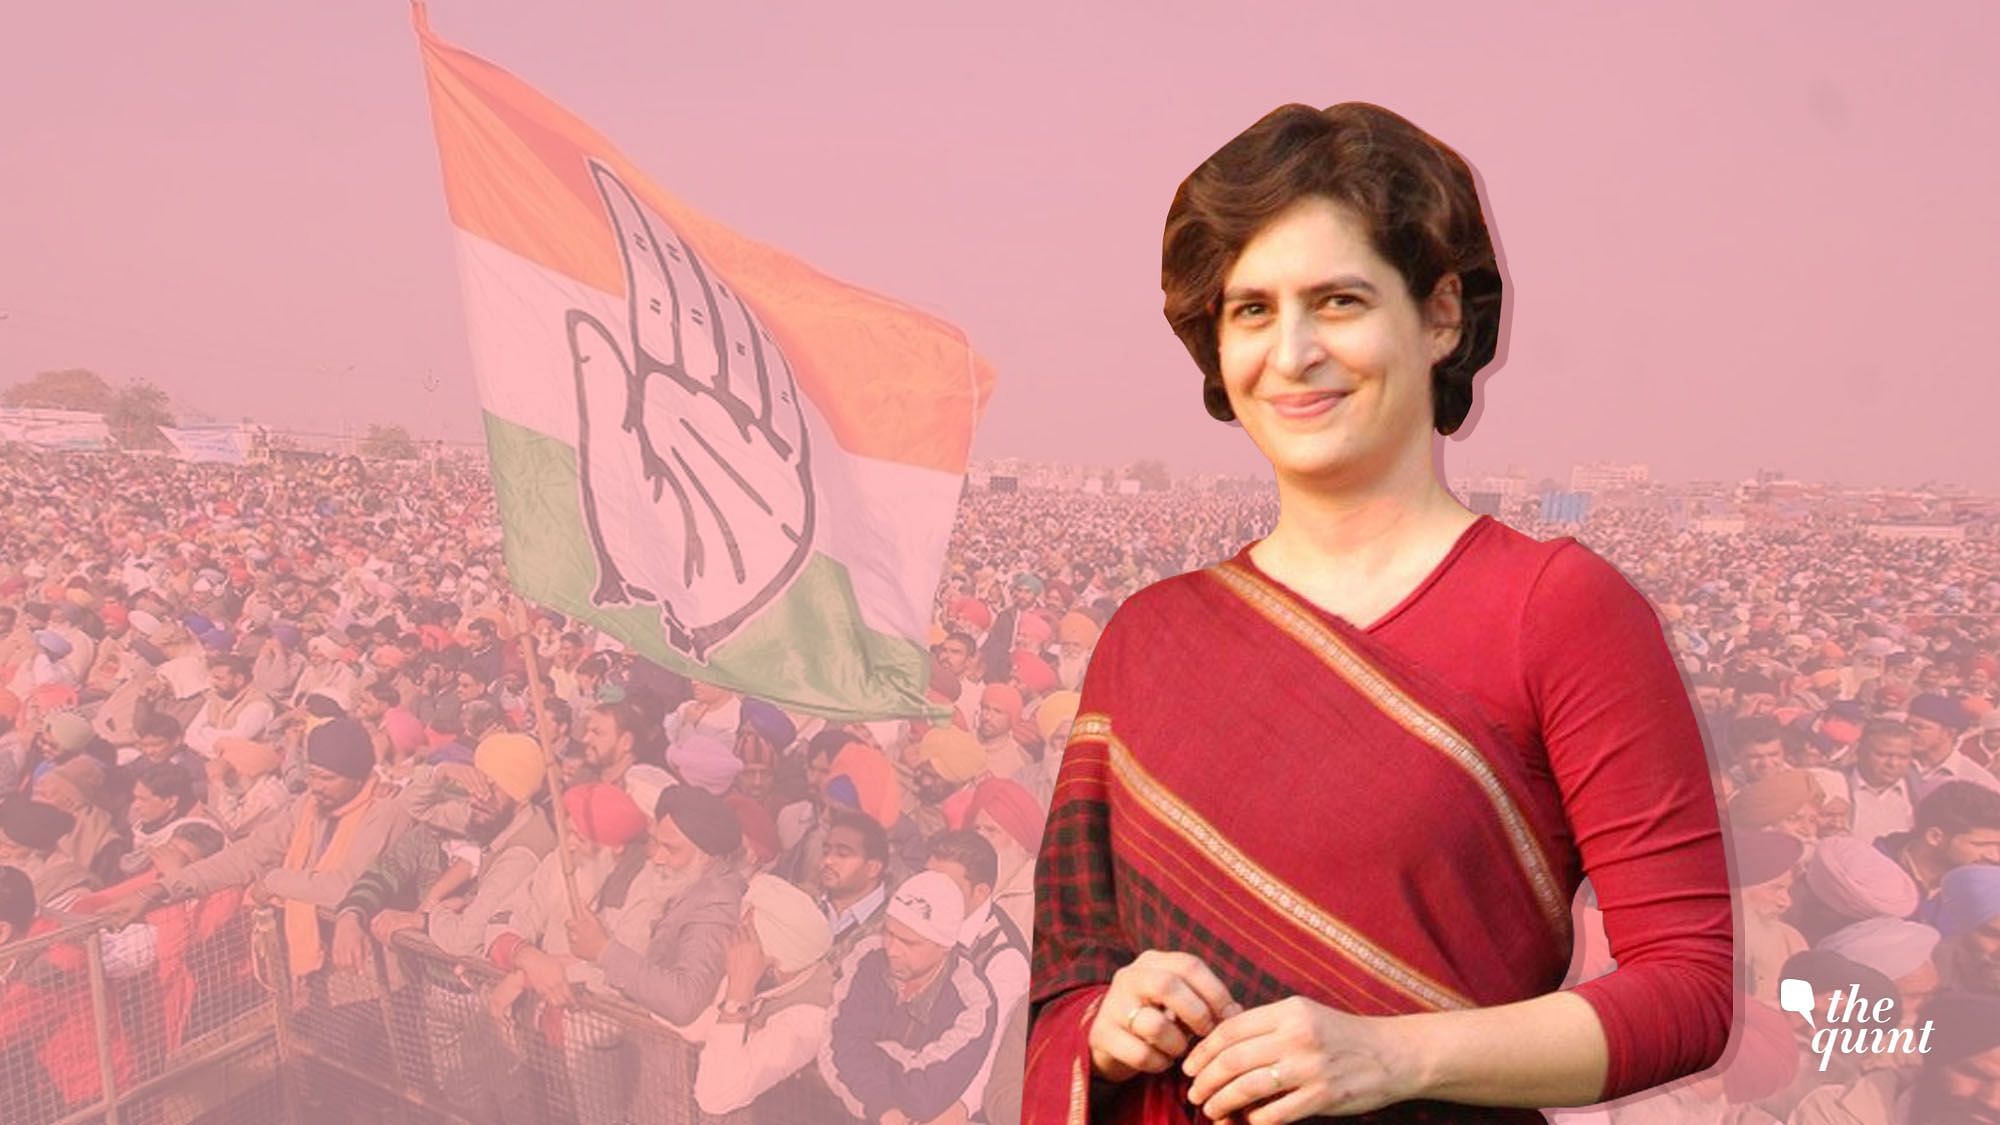 As the Congress’ face in East UP, it was expected that Priyanka Gandhi would take on PM Modi in Varanasi.